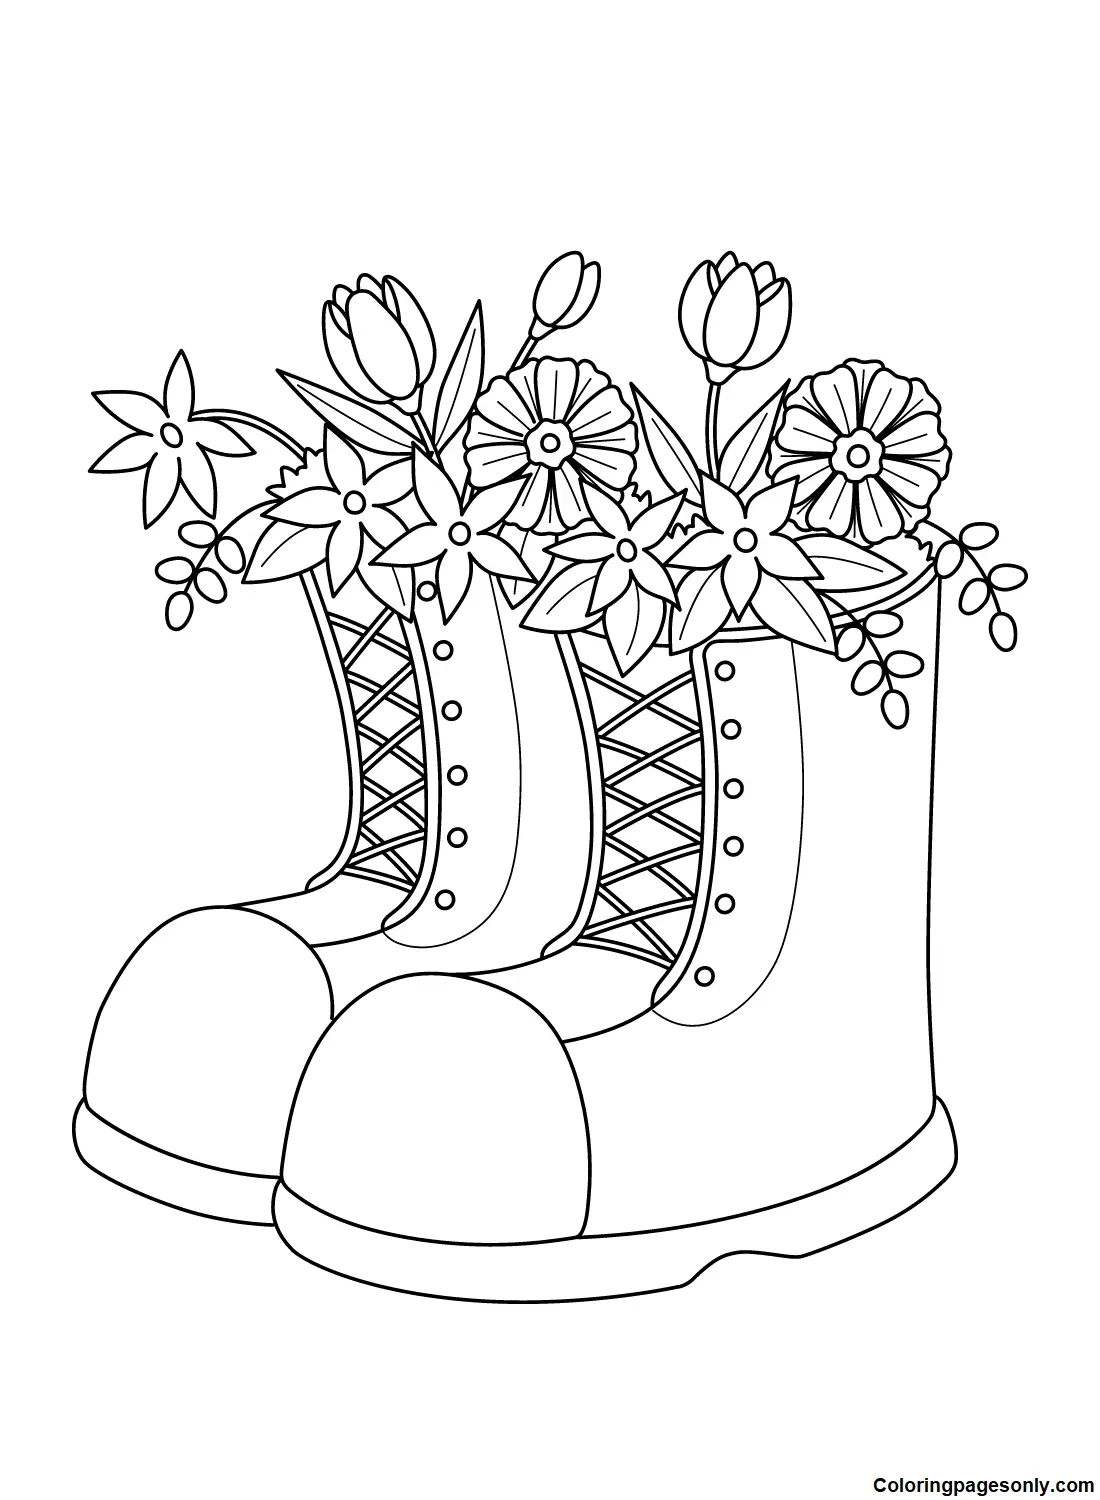 Boots Coloring Pages